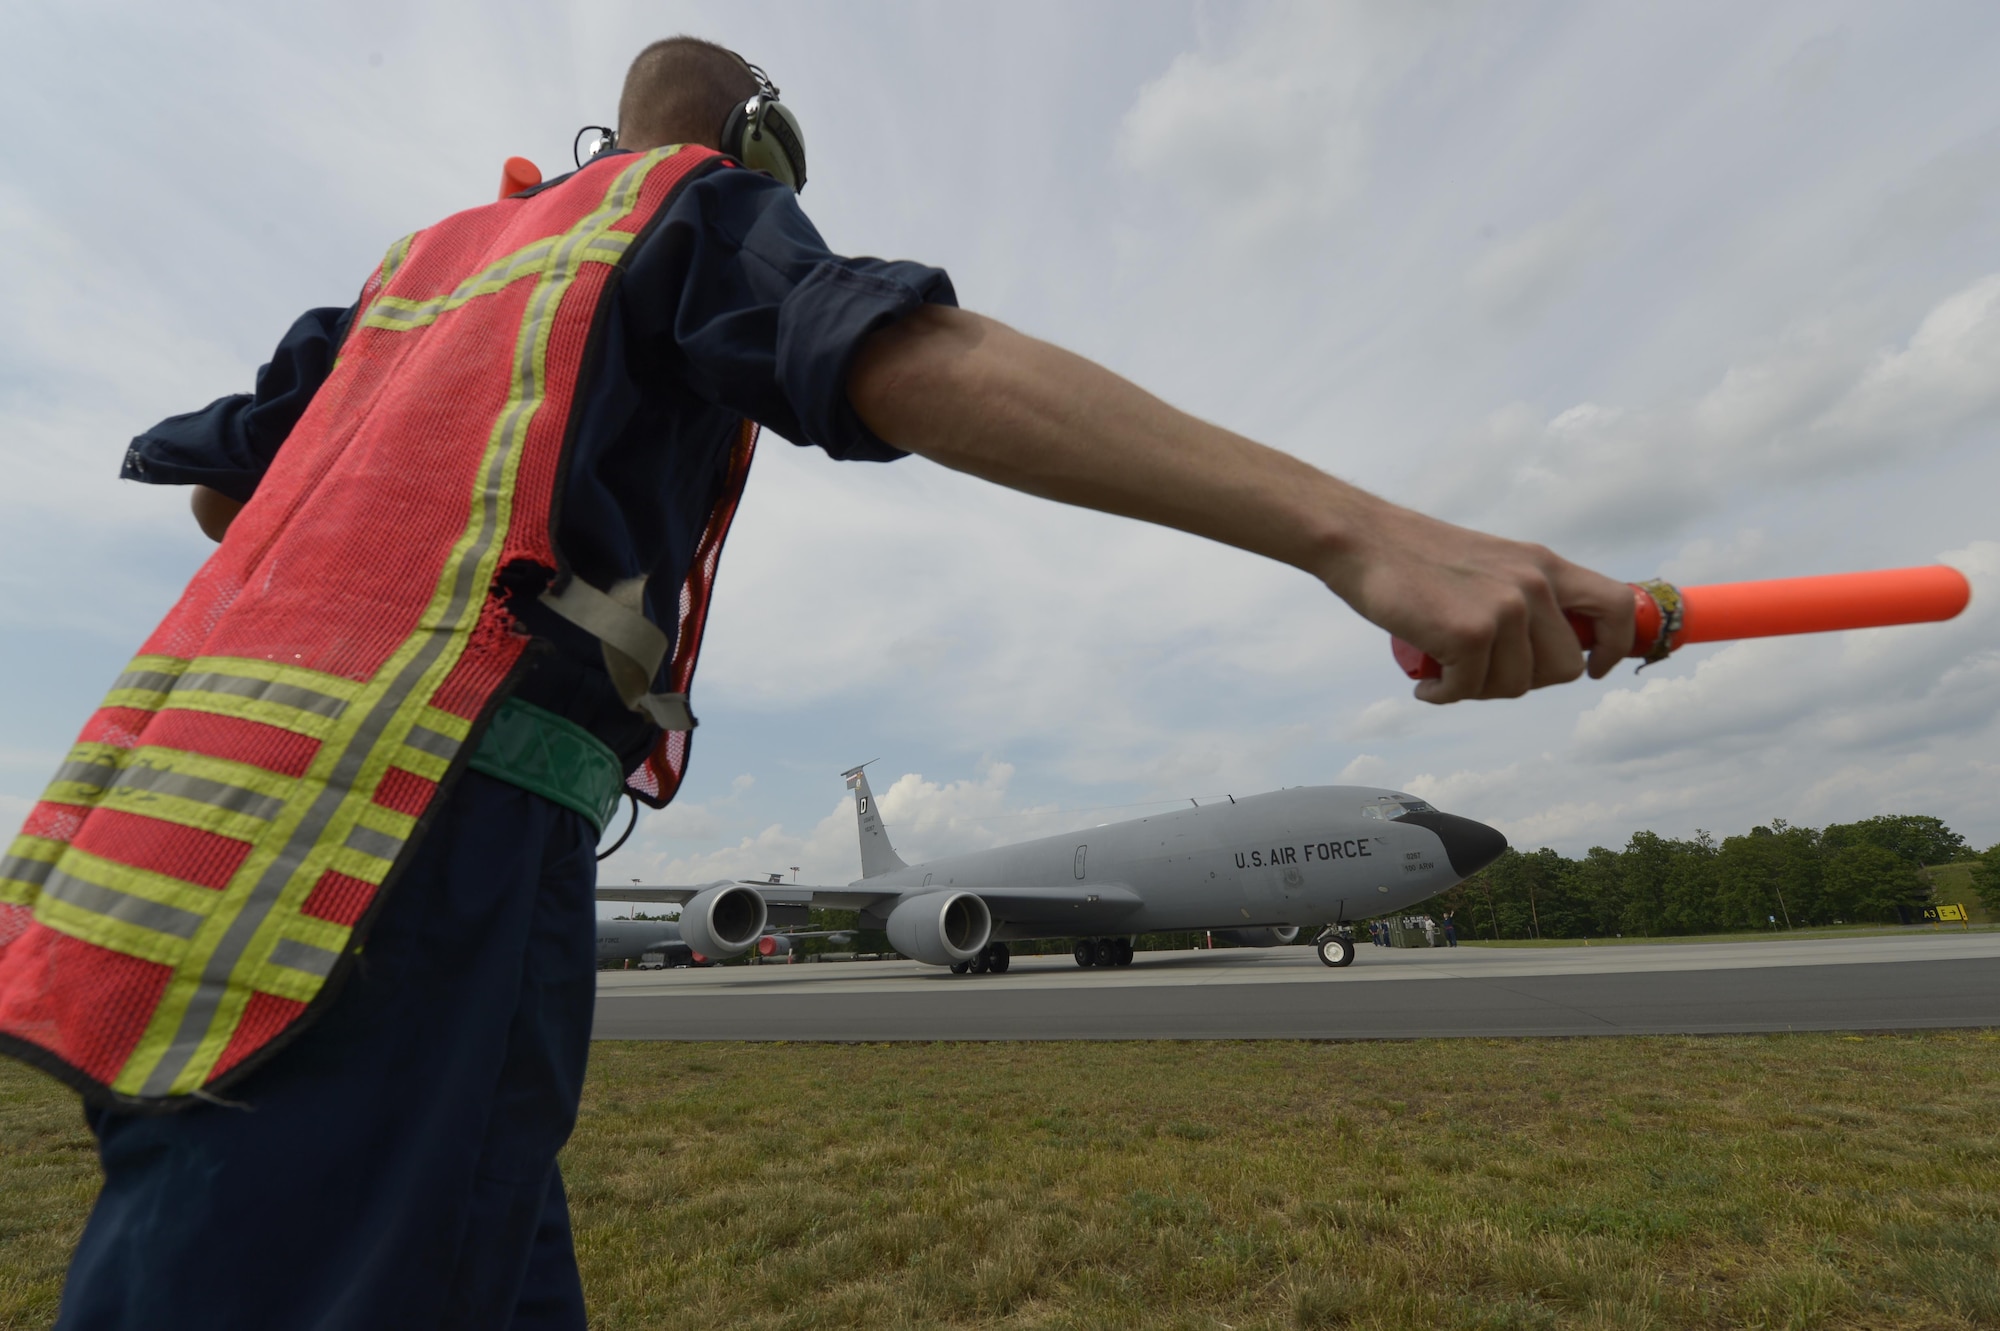 Staff Sgt. Joshua Kearney, 100th Aircraft Maintenance Squadron crew chief, marshalls a KC-135R Stratotanker
participating in BALTOPS exercise at Powidz Air Base, Poland, June 5, 2017. BALTOPS is an annually recurring
multinational exercise designed to enhance flexibility and interoperability, as well as demonstrate resolve of allied
and partner forces to defend the Baltic region. Participating nations include Belgium, Denmark, Estonia, Finland, France, Germany, Latvia, Lithuania, the Netherlands, Norway, Poland, Sweden, the United Kingdom, and the United States. (U.S. Air Force photo by Staff Sgt. Jonathan Snyder)